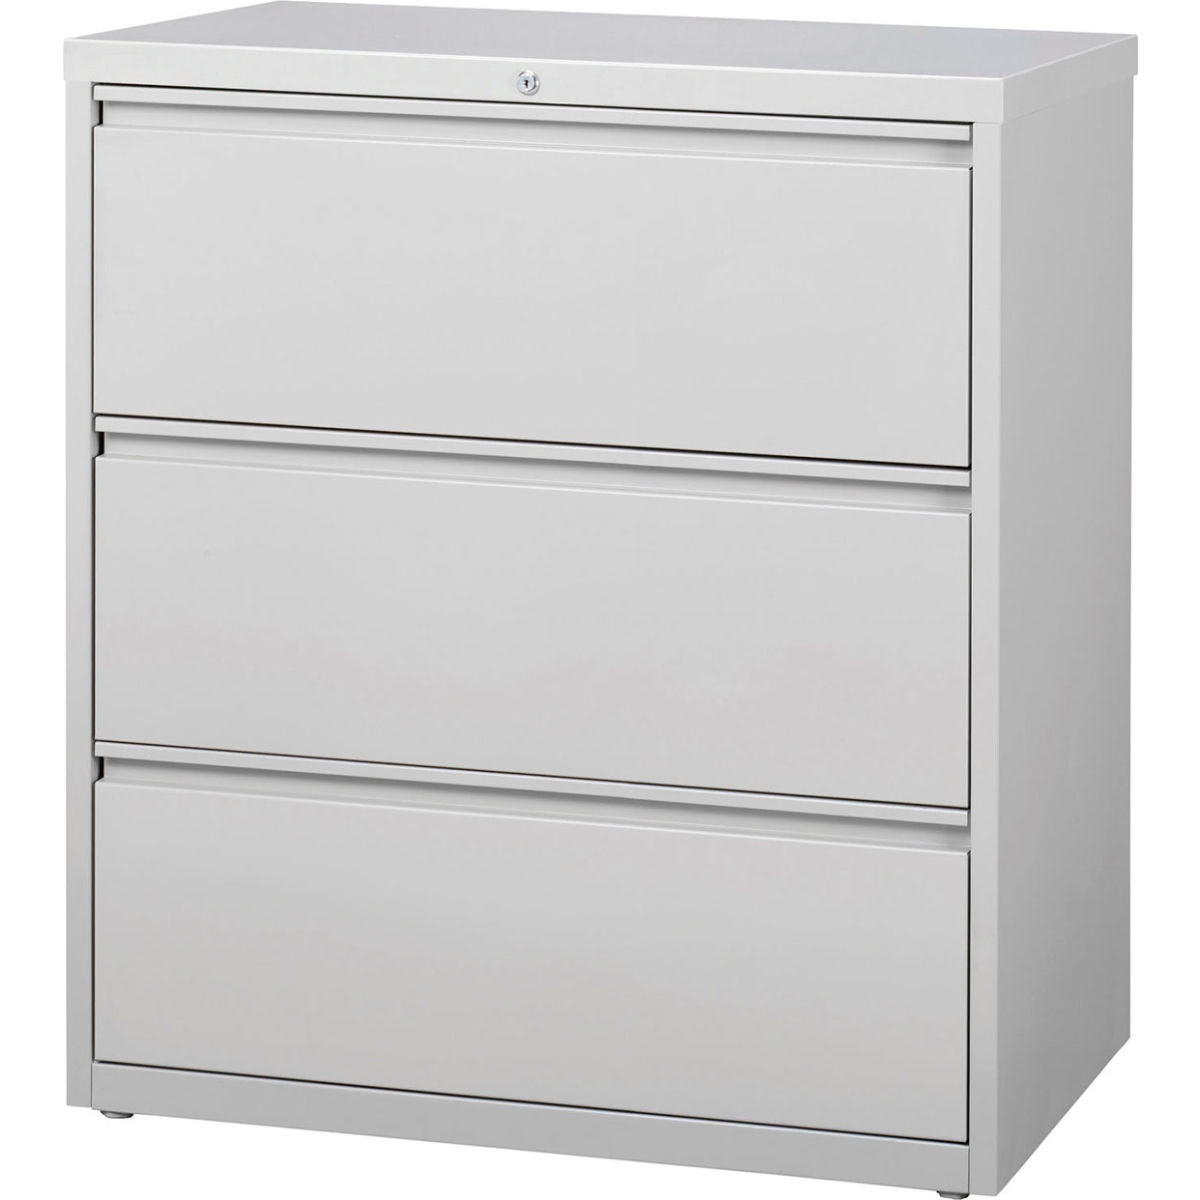 Hirsh Industries B691007 36 in. HL10000 Series Lateral File with 3-Drawer - Light Gray